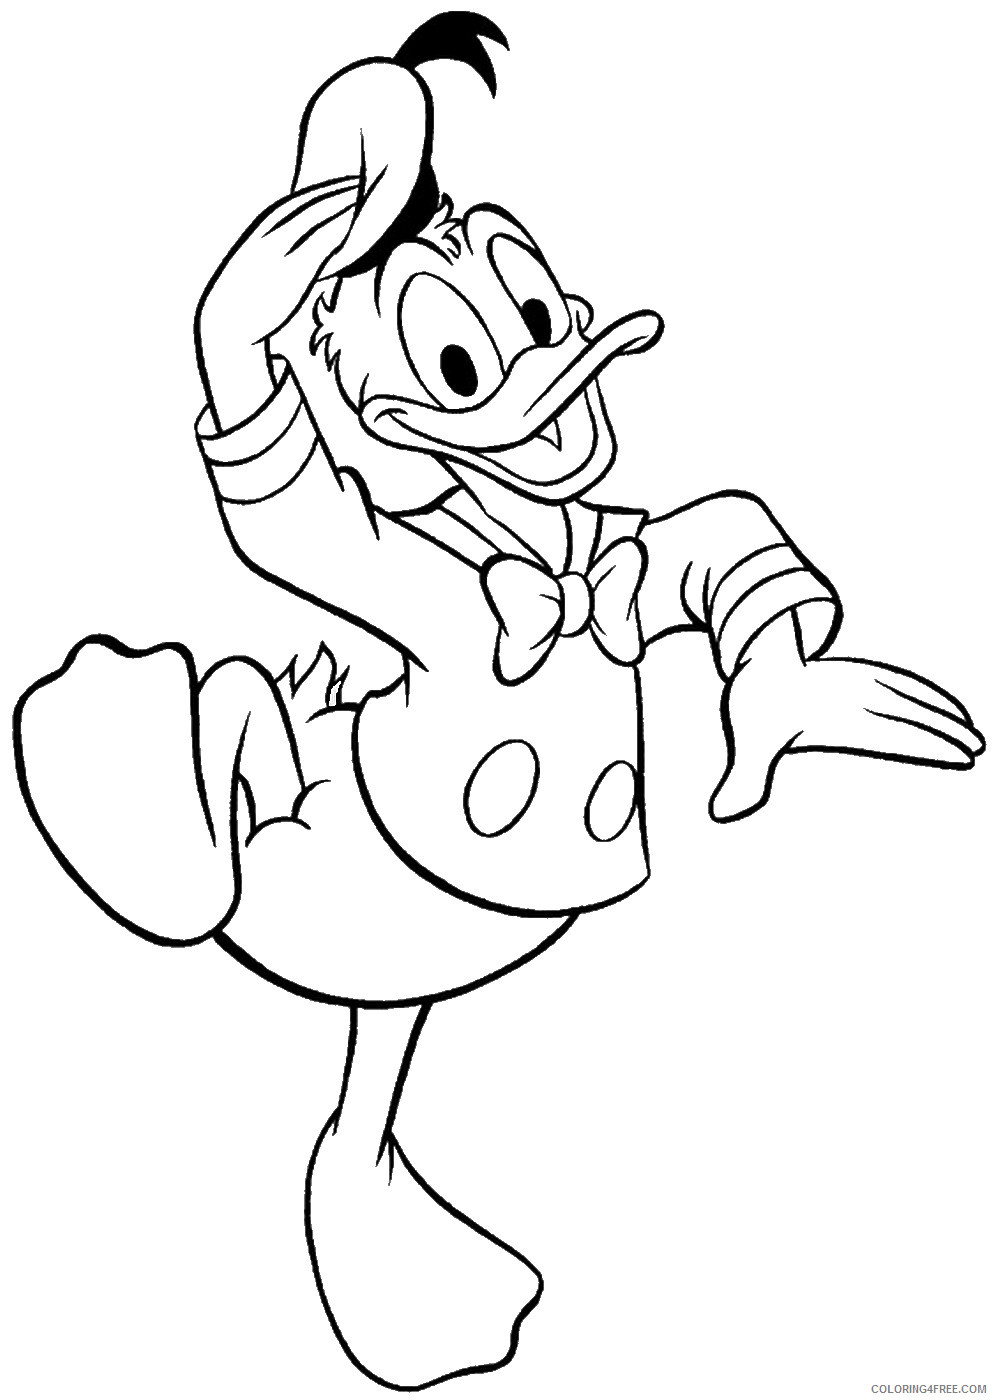 Donald Duck Coloring Pages Cartoons donald_40 Printable 2020 2523 Coloring4free